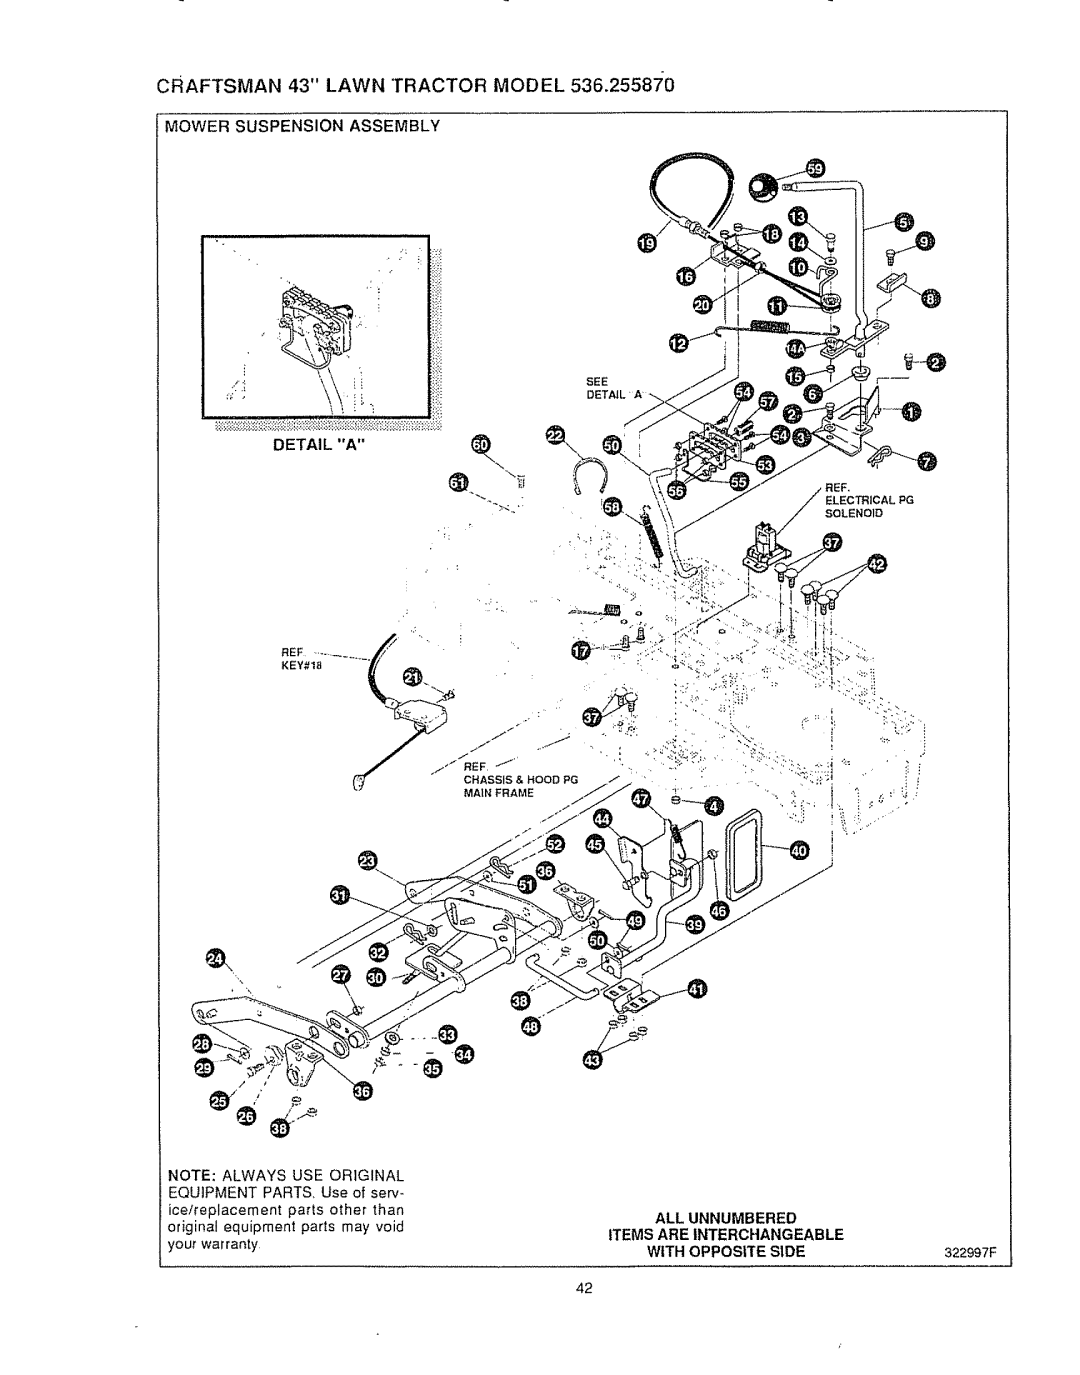 Sears 536.25587 owner manual CRAFTSMAN 43 LAWN TRACTOR MODEL 536.2558/0, Mower Suspension Assembly 